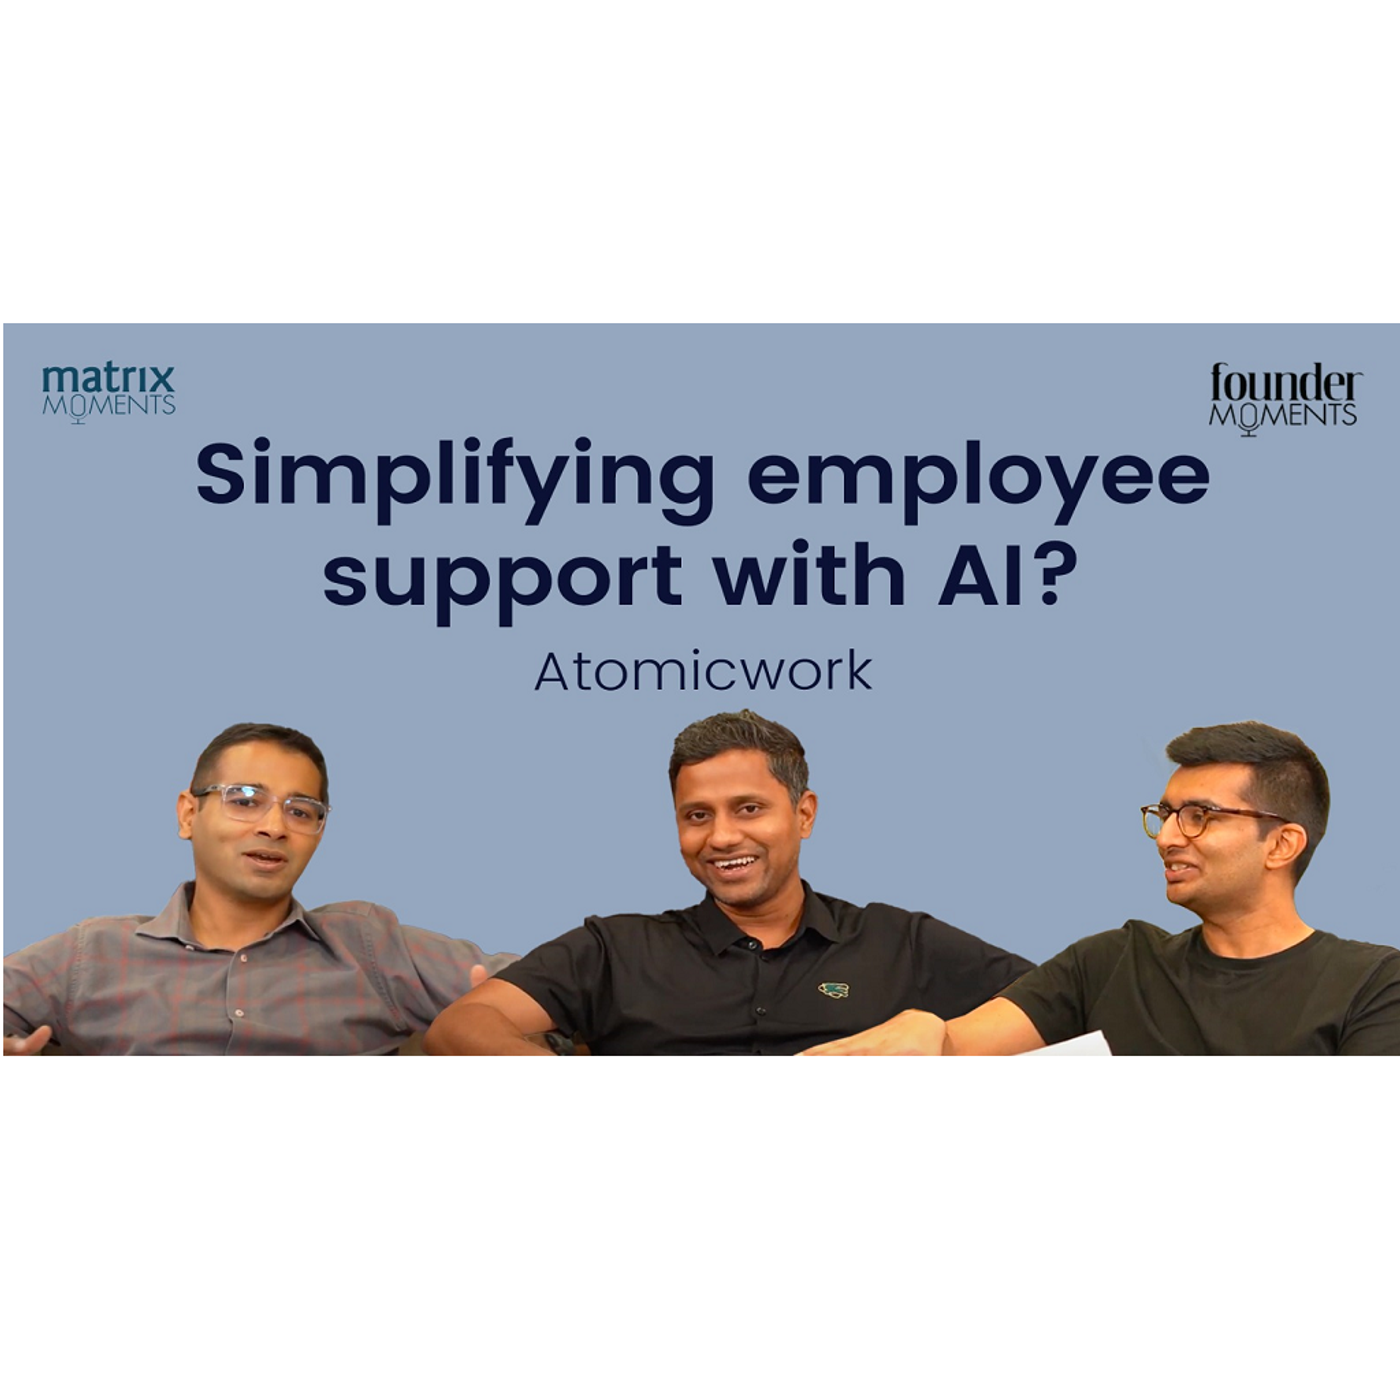 179: Matrix Moments: Simplifying employee support with AI - Atomicwork